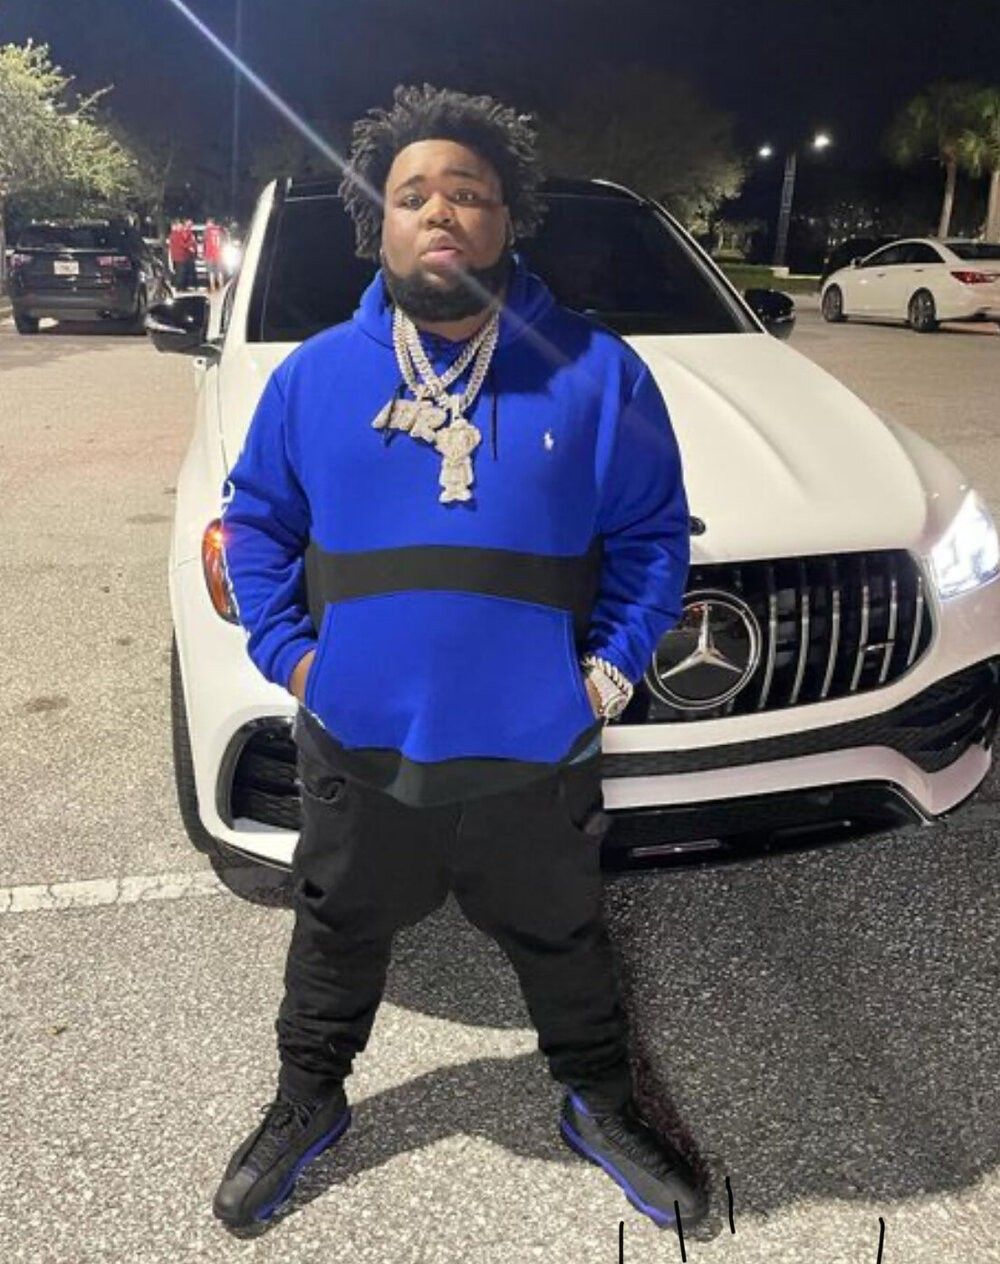 Rapper KJ Balla poses in front of a Mercedes Benz. Balla was shot and killed on May 15, 2021. - Rod Wave